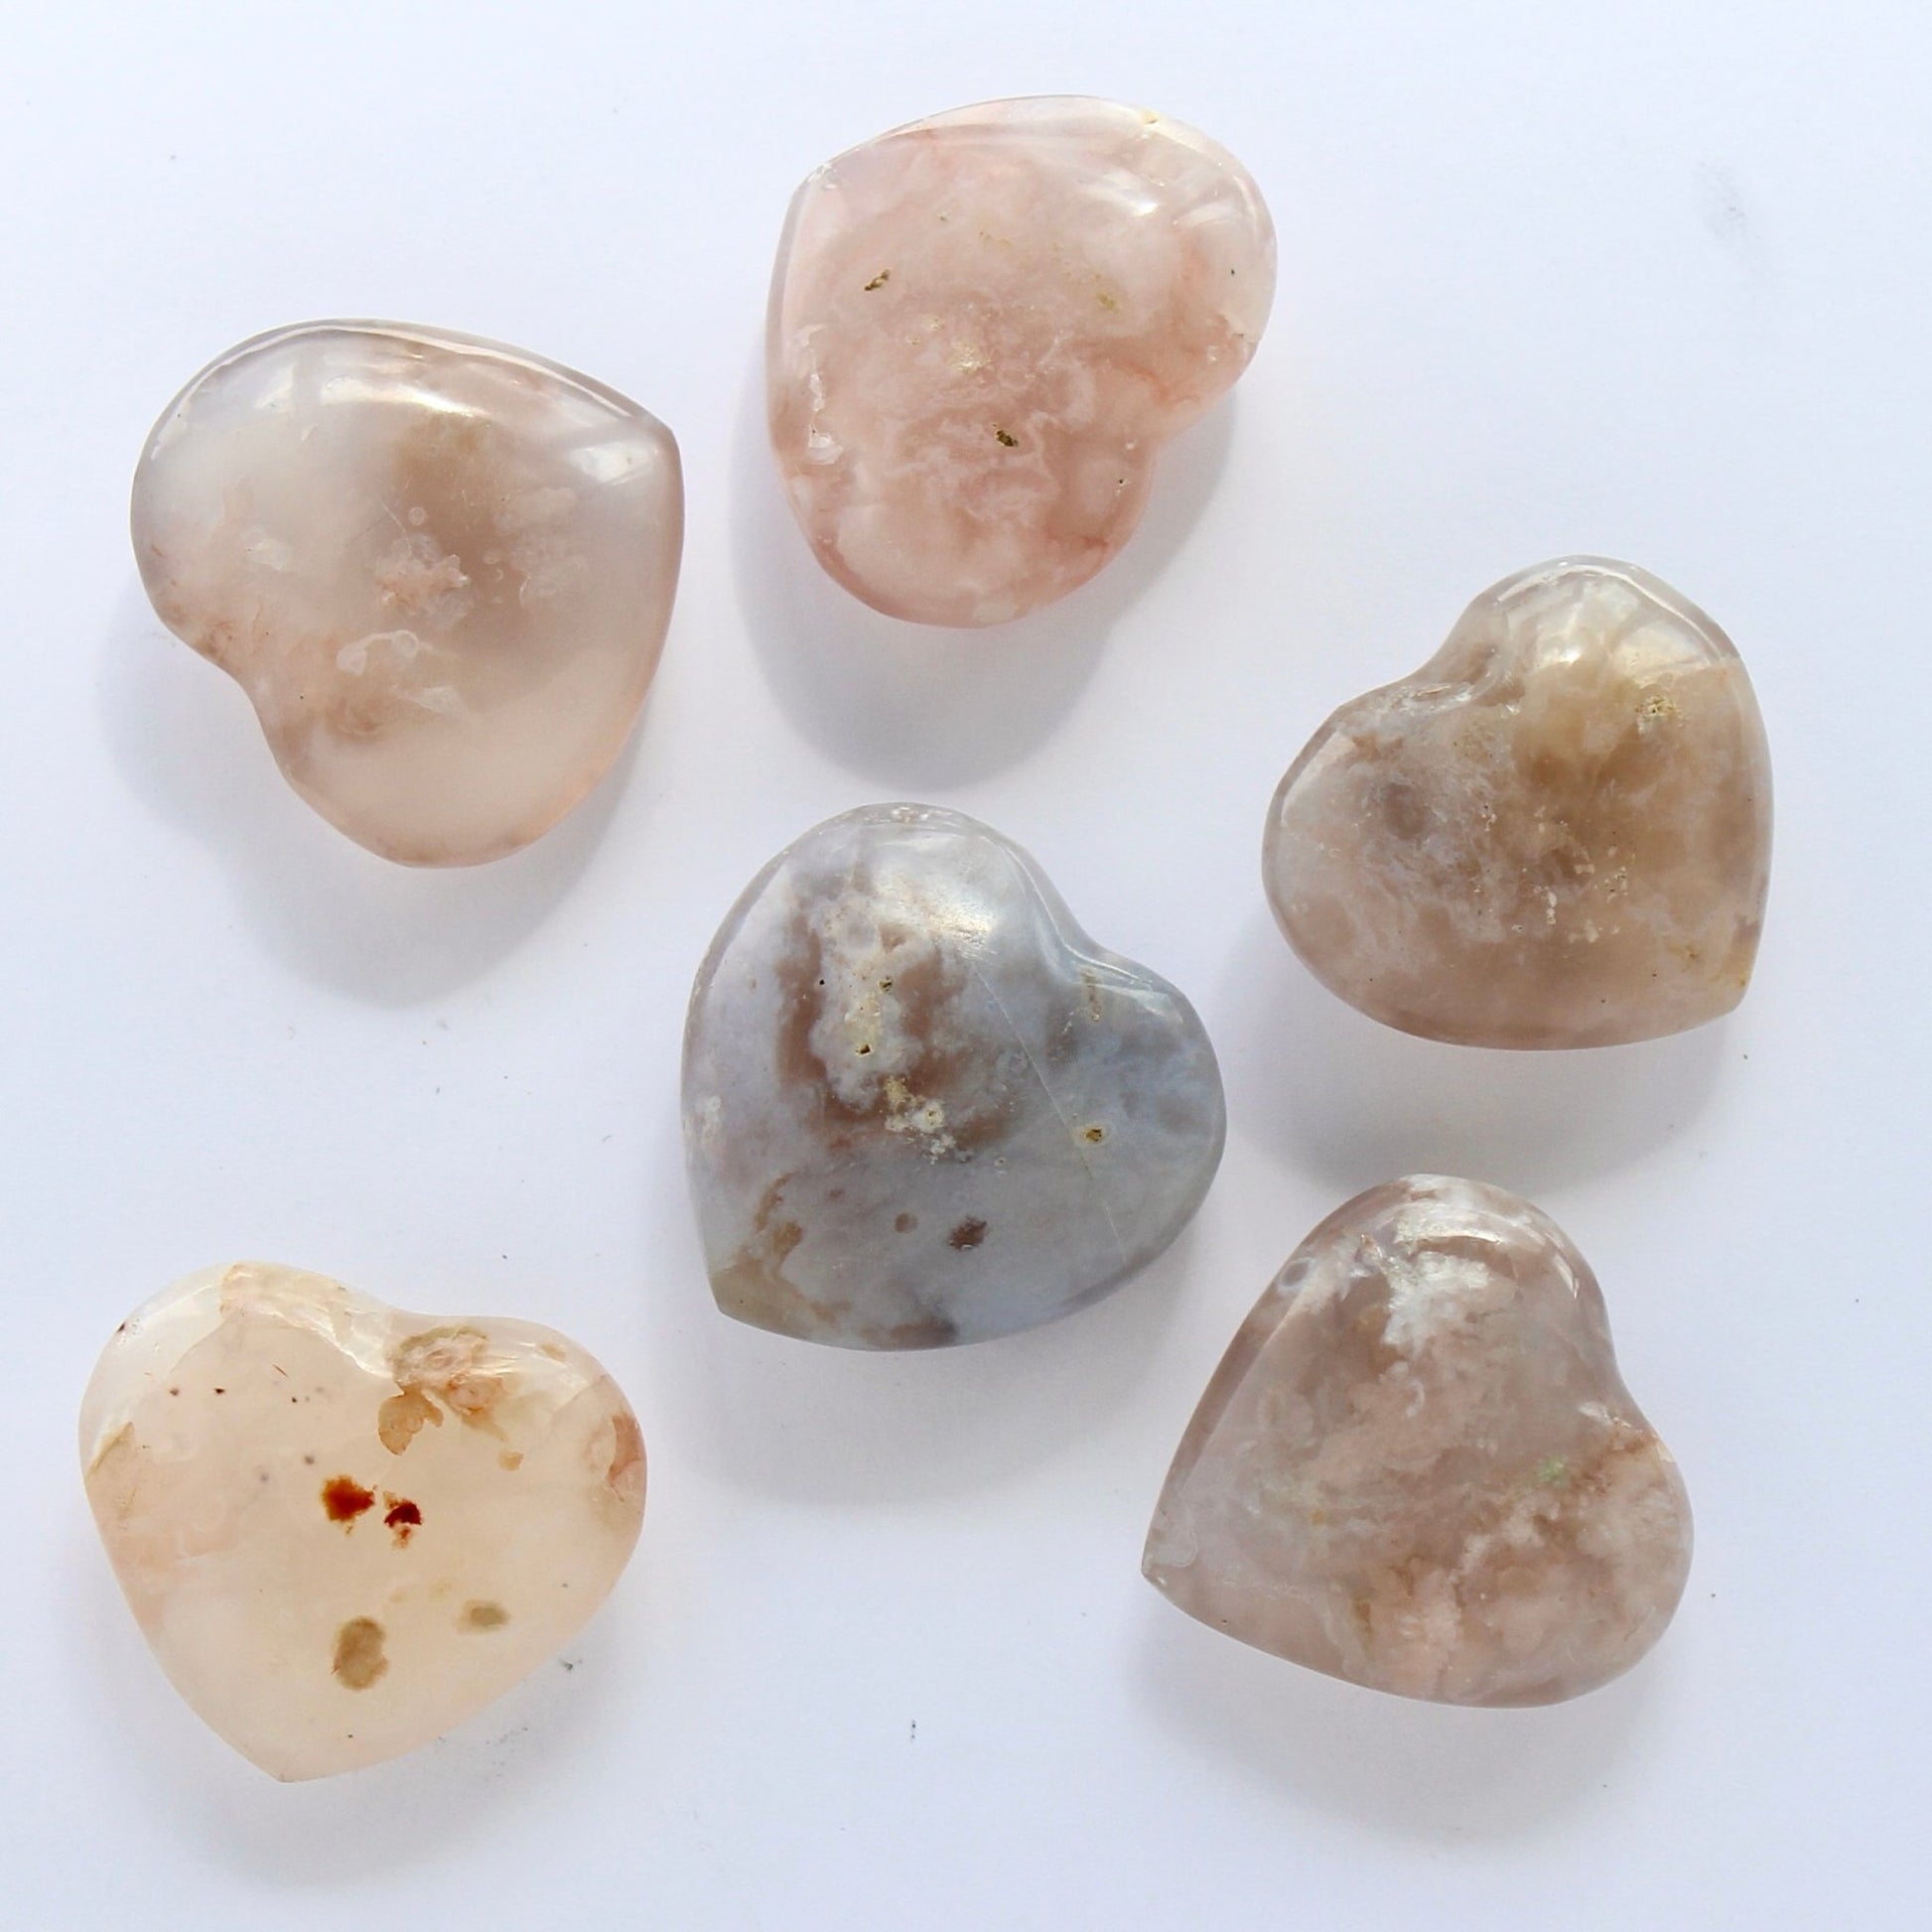 Flower Agate Heart - Conscious Crystals New Zealand Crystal and Spiritual Shop